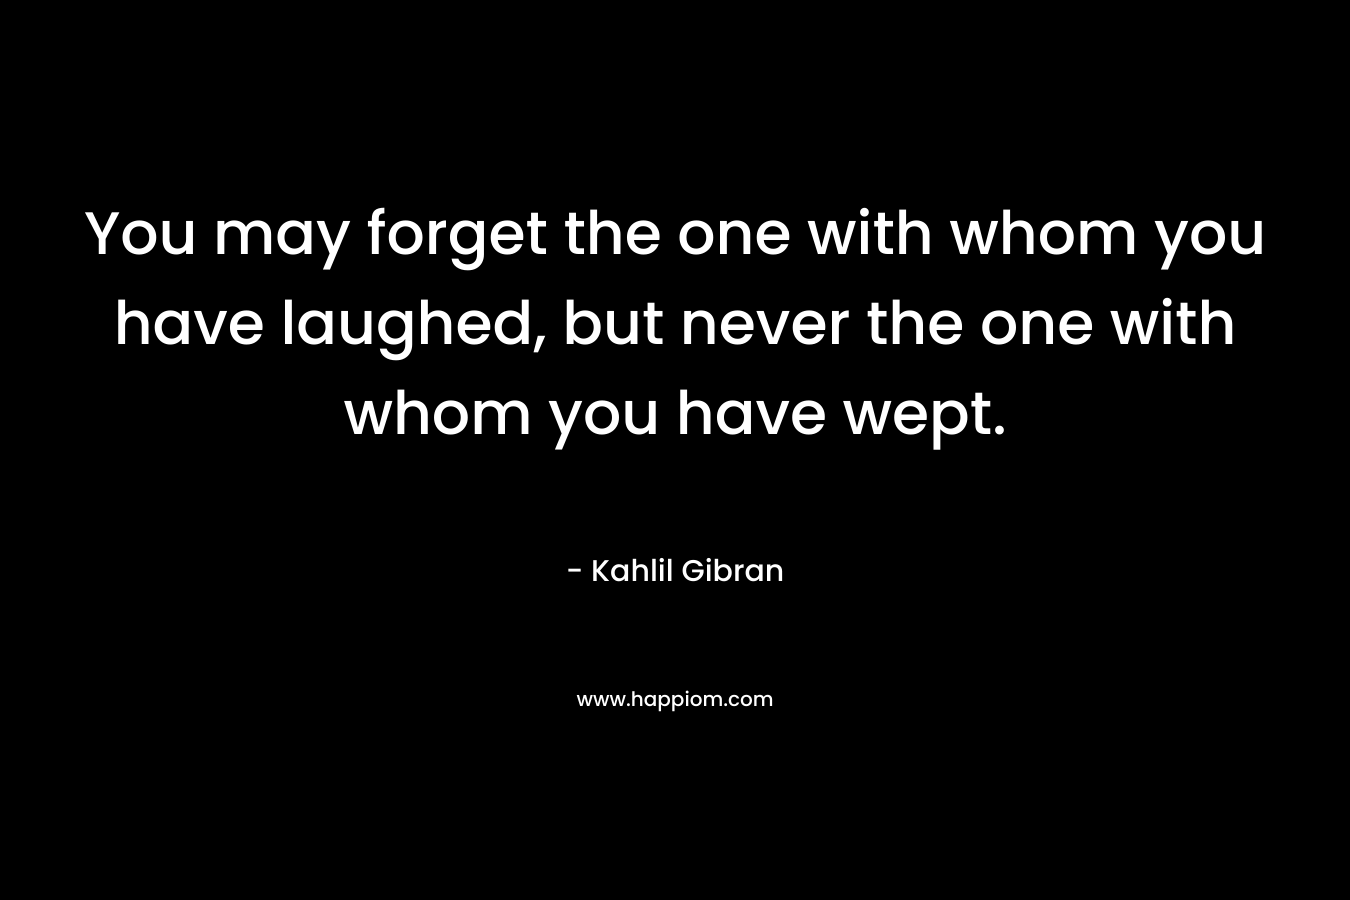 You may forget the one with whom you have laughed, but never the one with whom you have wept.